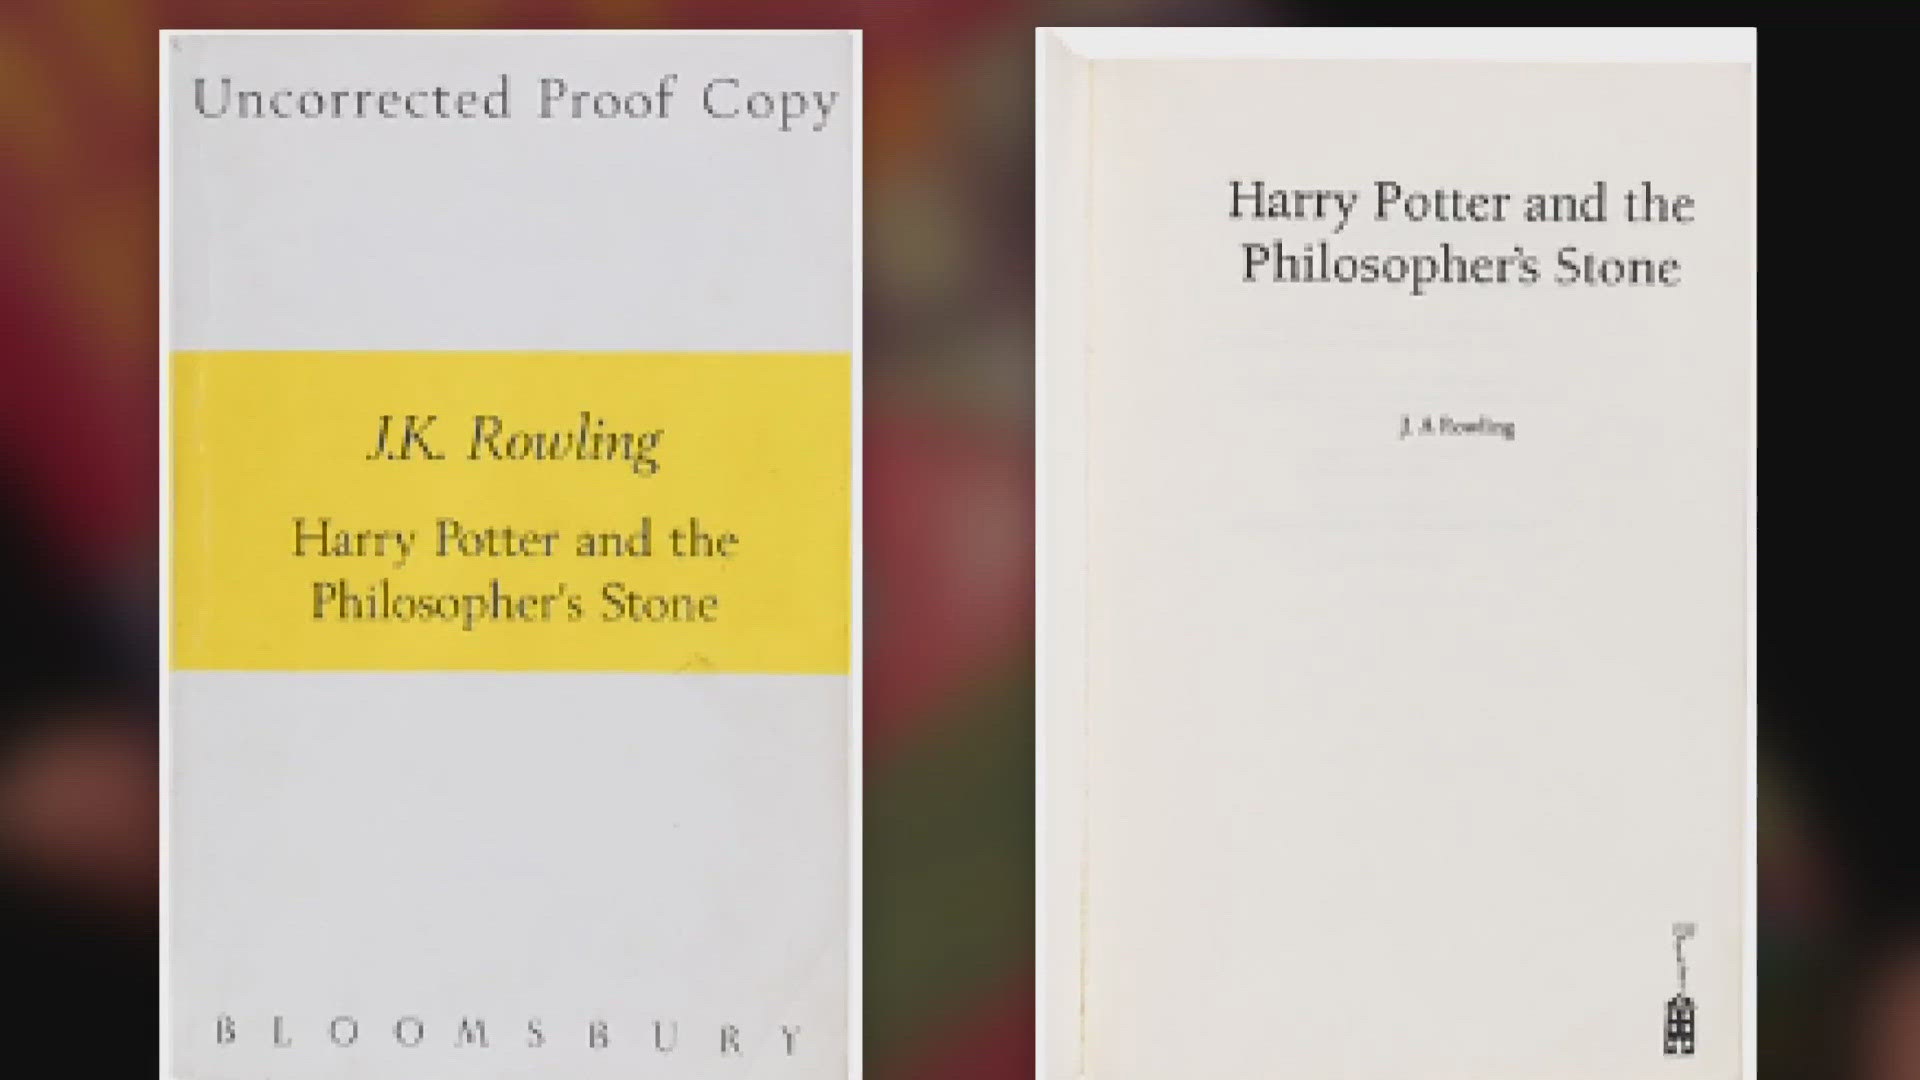 A rare uncorrected proof copy of “Harry Potter and the Philosopher’s Stone” is coming up for auction in Dallas.